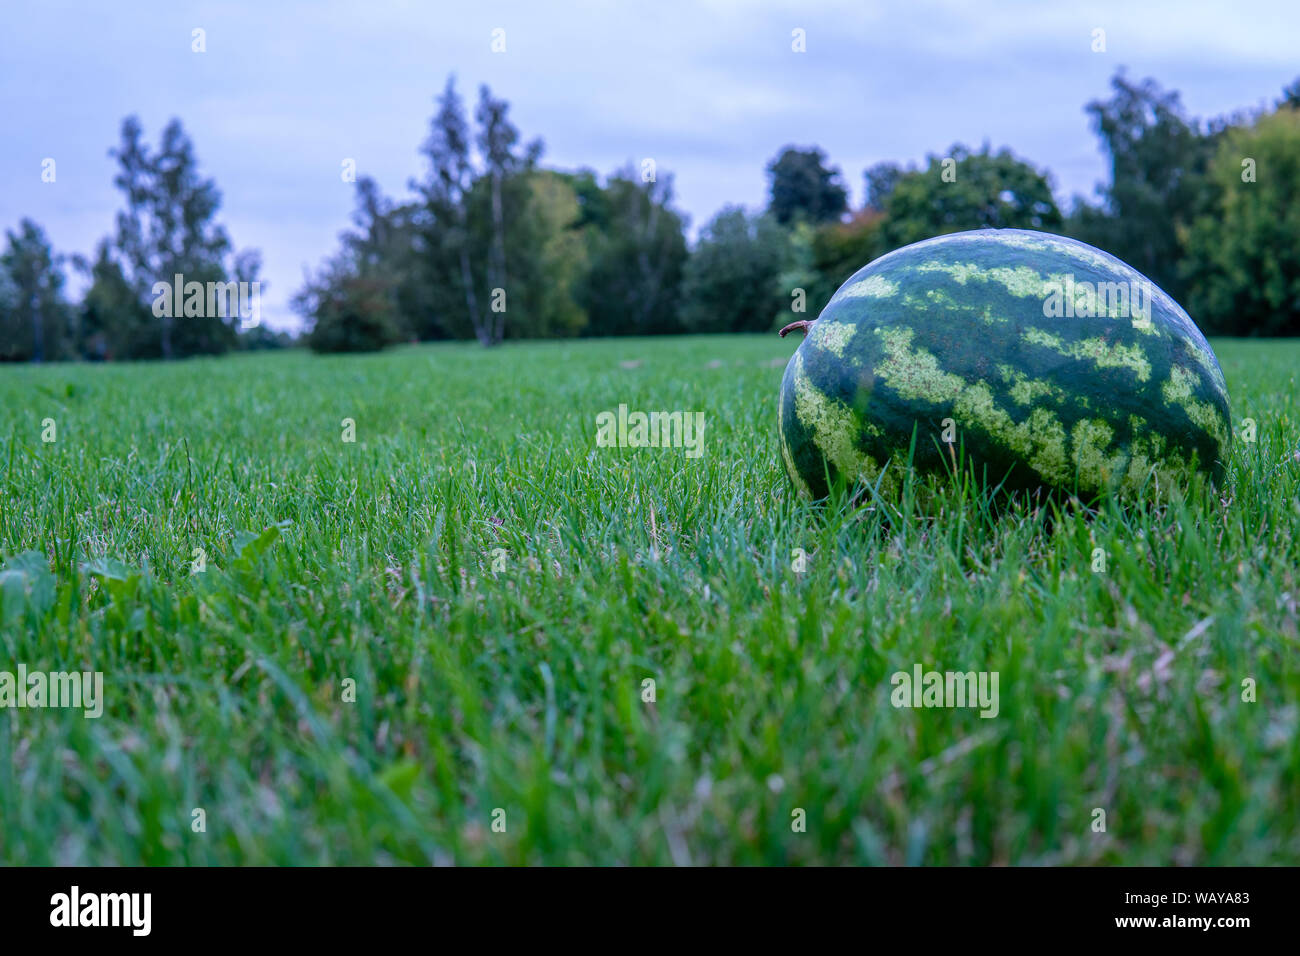 Large bright red watermelon, slice of watermelon, green grass against wood outdoors in the summer lies on the field striped ball Stock Photo